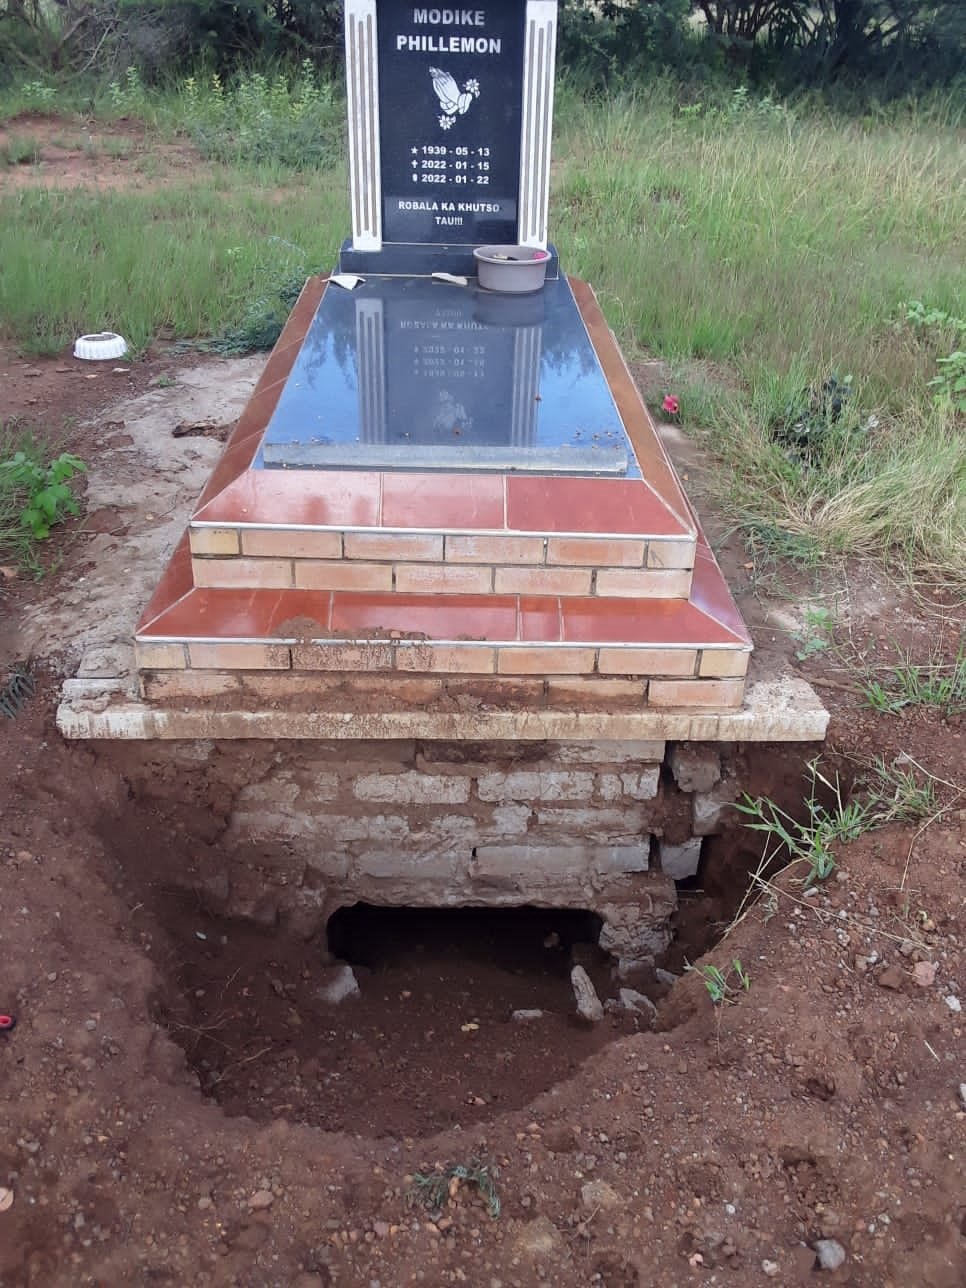 Family members made a horrific discovery after finding the grave of madala Philemon Masedi opened and his corpse stolen. Photo Supplied